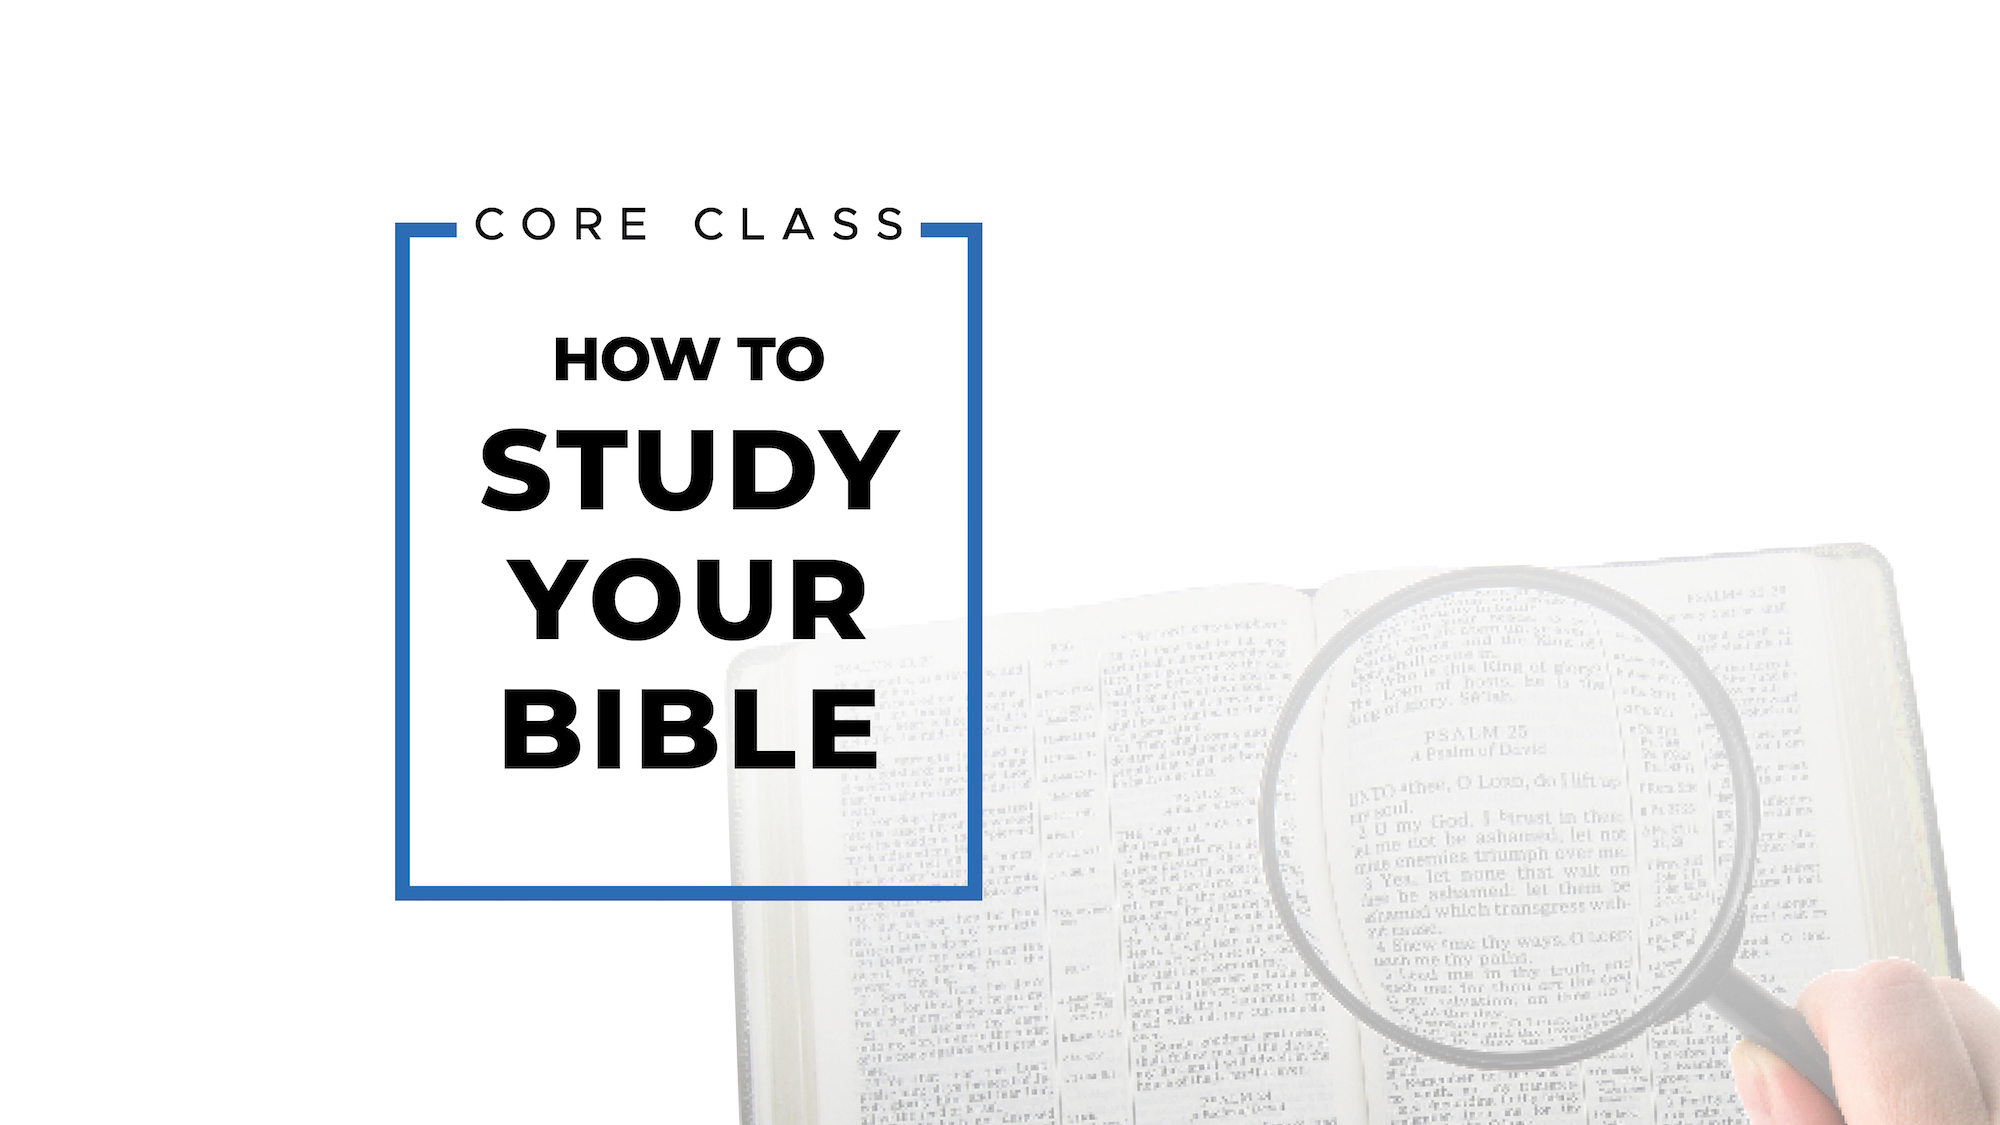 How to Study Your Bible Image